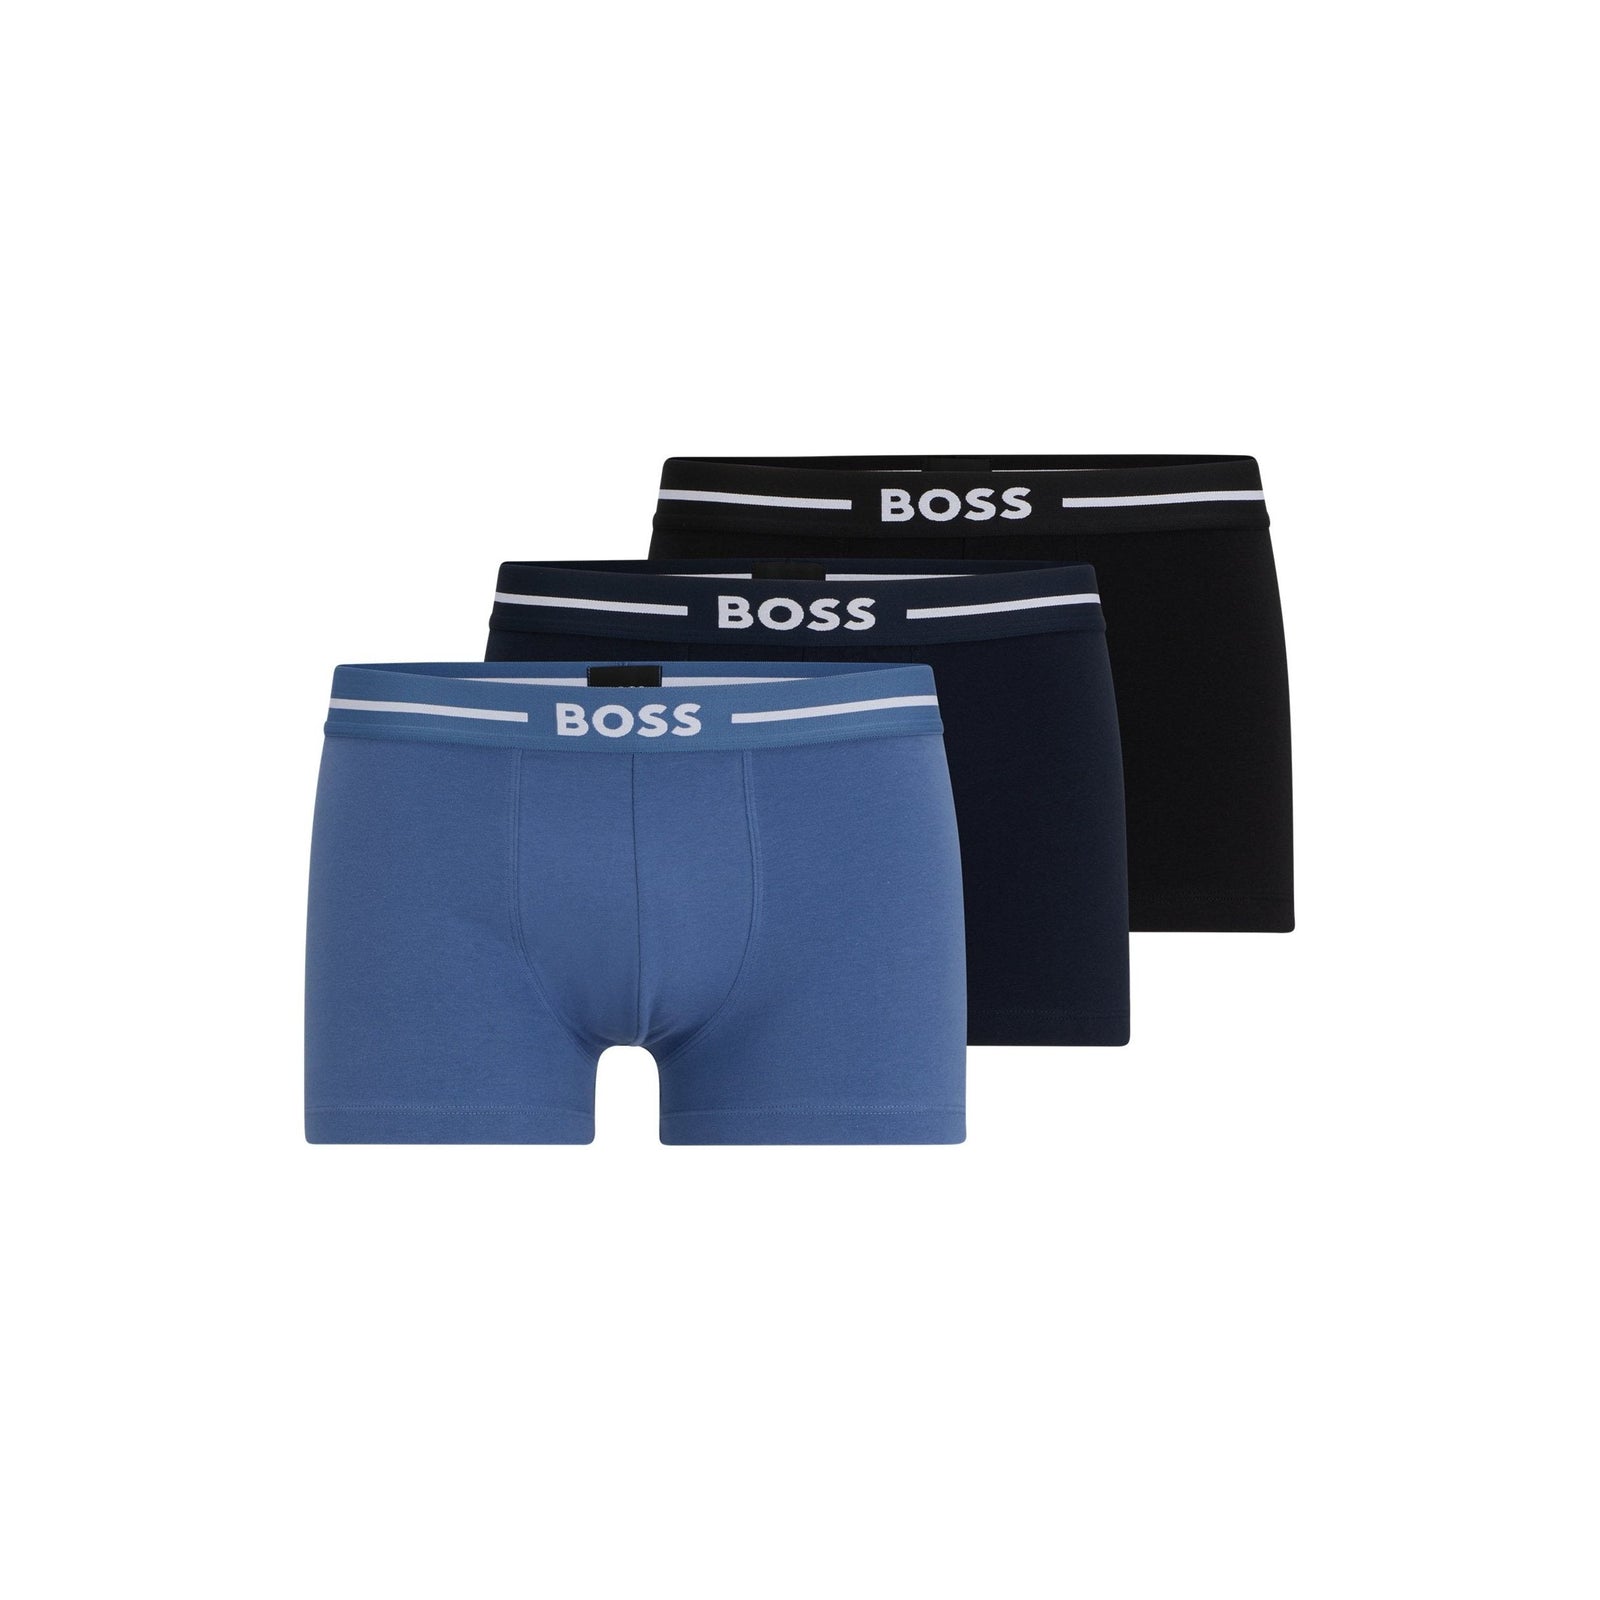 BOSS STRETCH COTTON BOXER SHORTS WITH ELASTIC WAISTBAND WITH LOGO IN A PACK OF THREE - Yooto